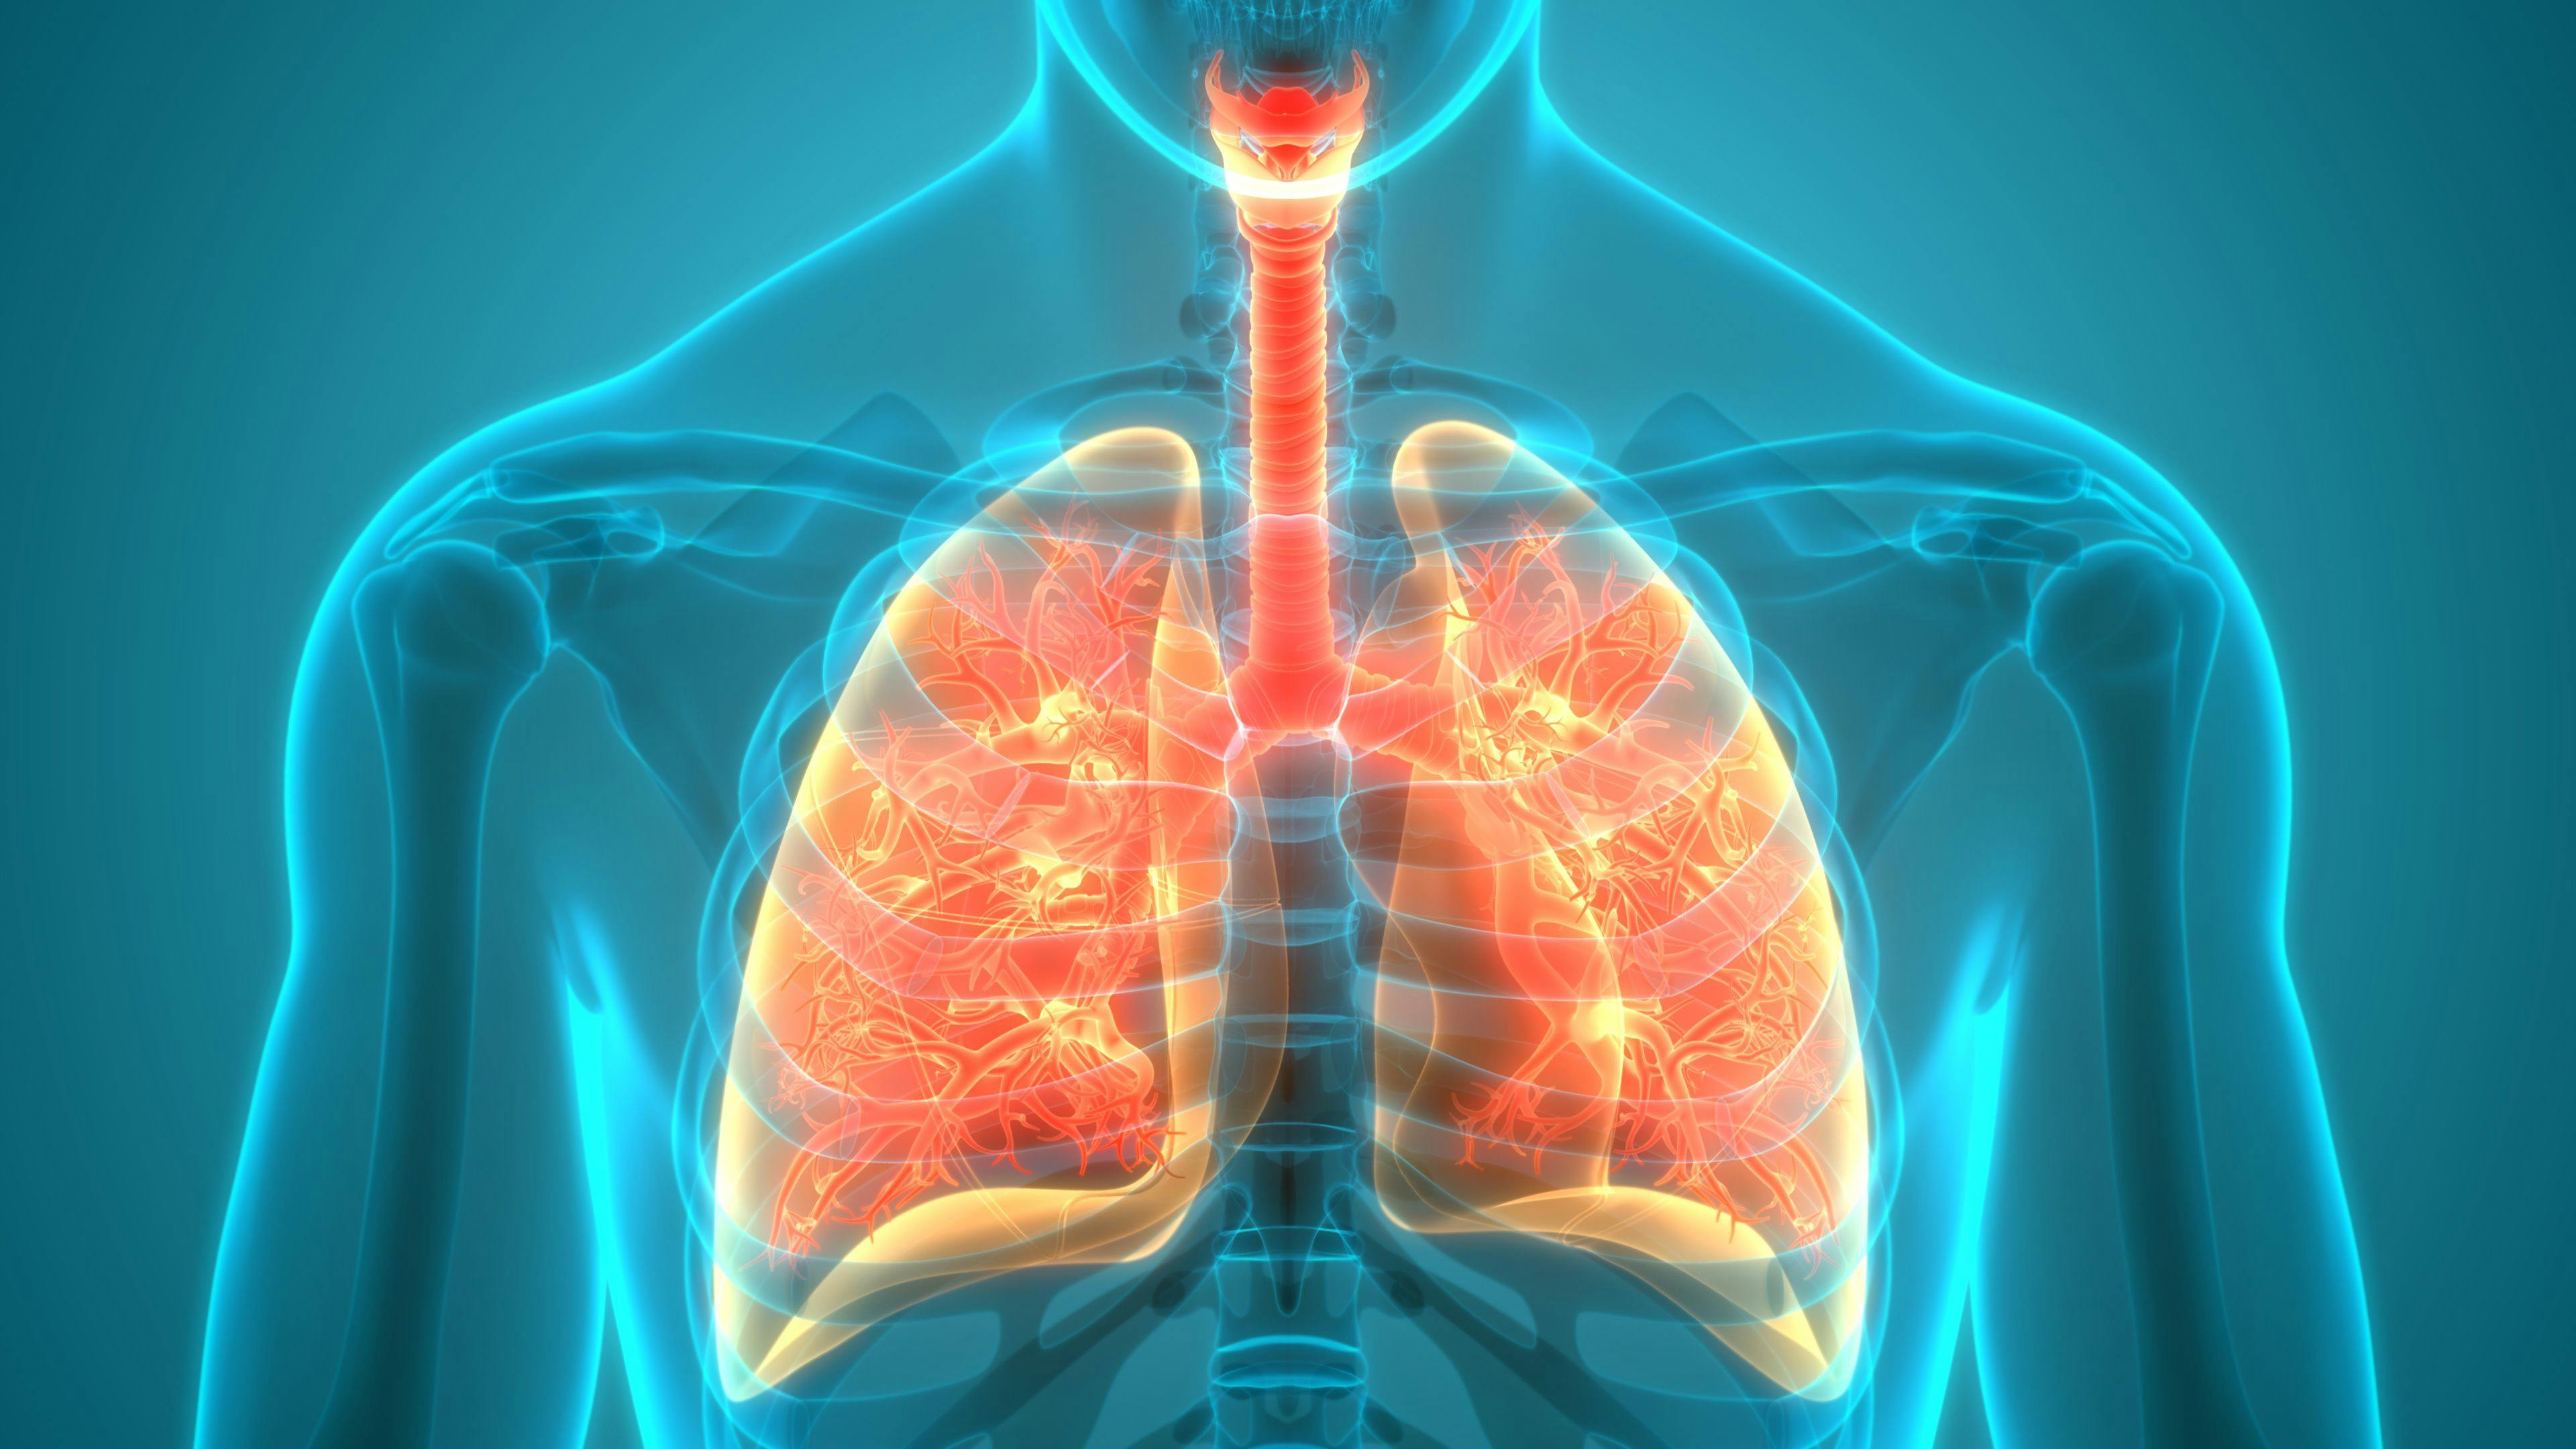 COVID-19 Has Devastating Effects for Patients Suffering From COPD